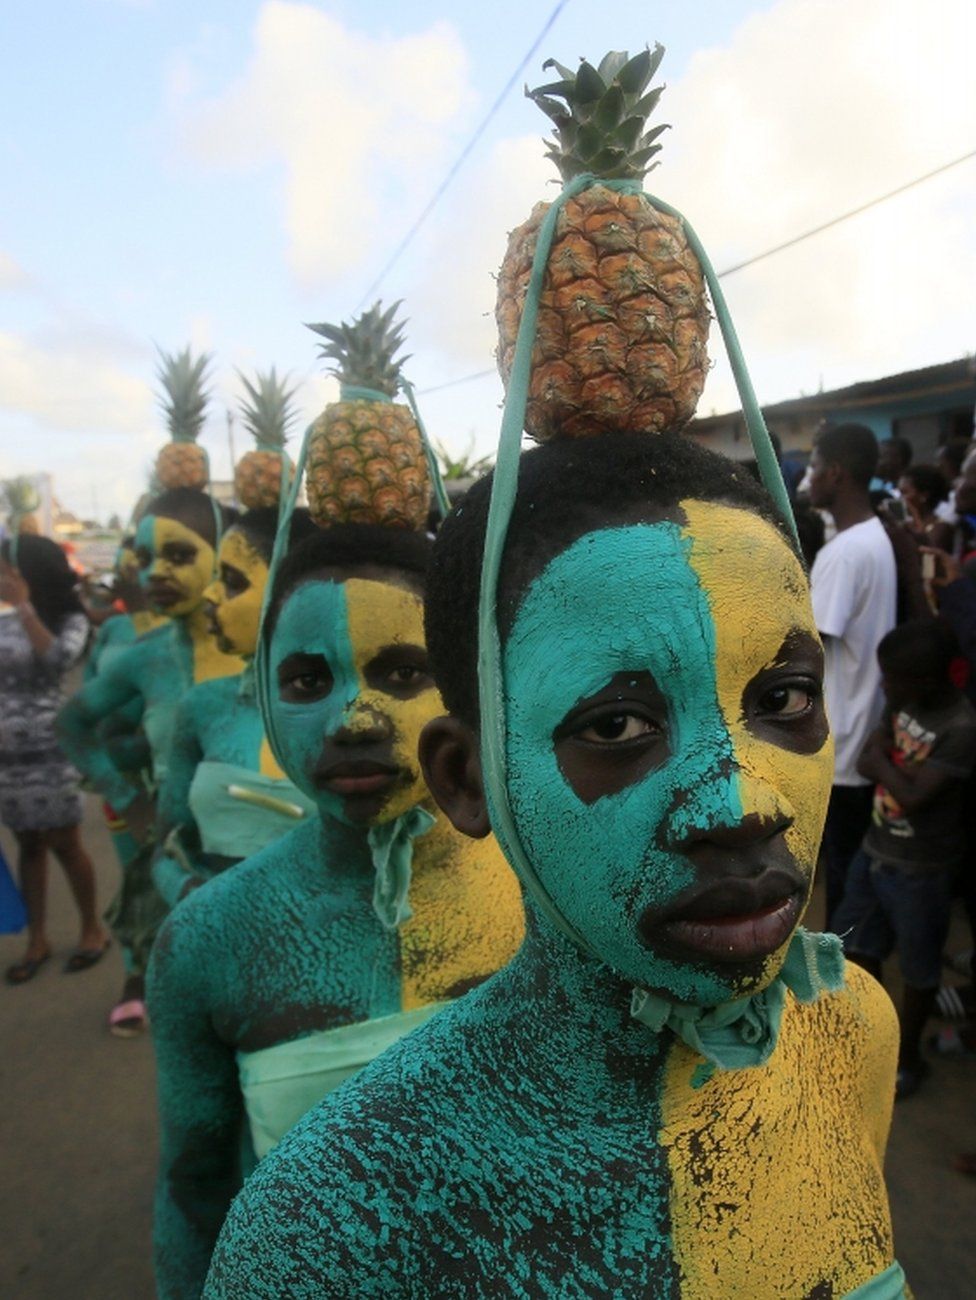 Ivorians take part in a parade on the last day of the 38th Popo Carnival in Bonoua, 60km south of Abidjan, Ivory Coast, 14 April 2018. The carnival of Bonoua is the Ivoirians version of Mardi Gras running for a week. Derived from at first a celebration of the cultural heritage of the Aboure people, the Popo Carnival involves gastronomic competitions, Miss pageants, sports days, a festival of traditional dances and reflection workshops on Popo museum amongst other activities.